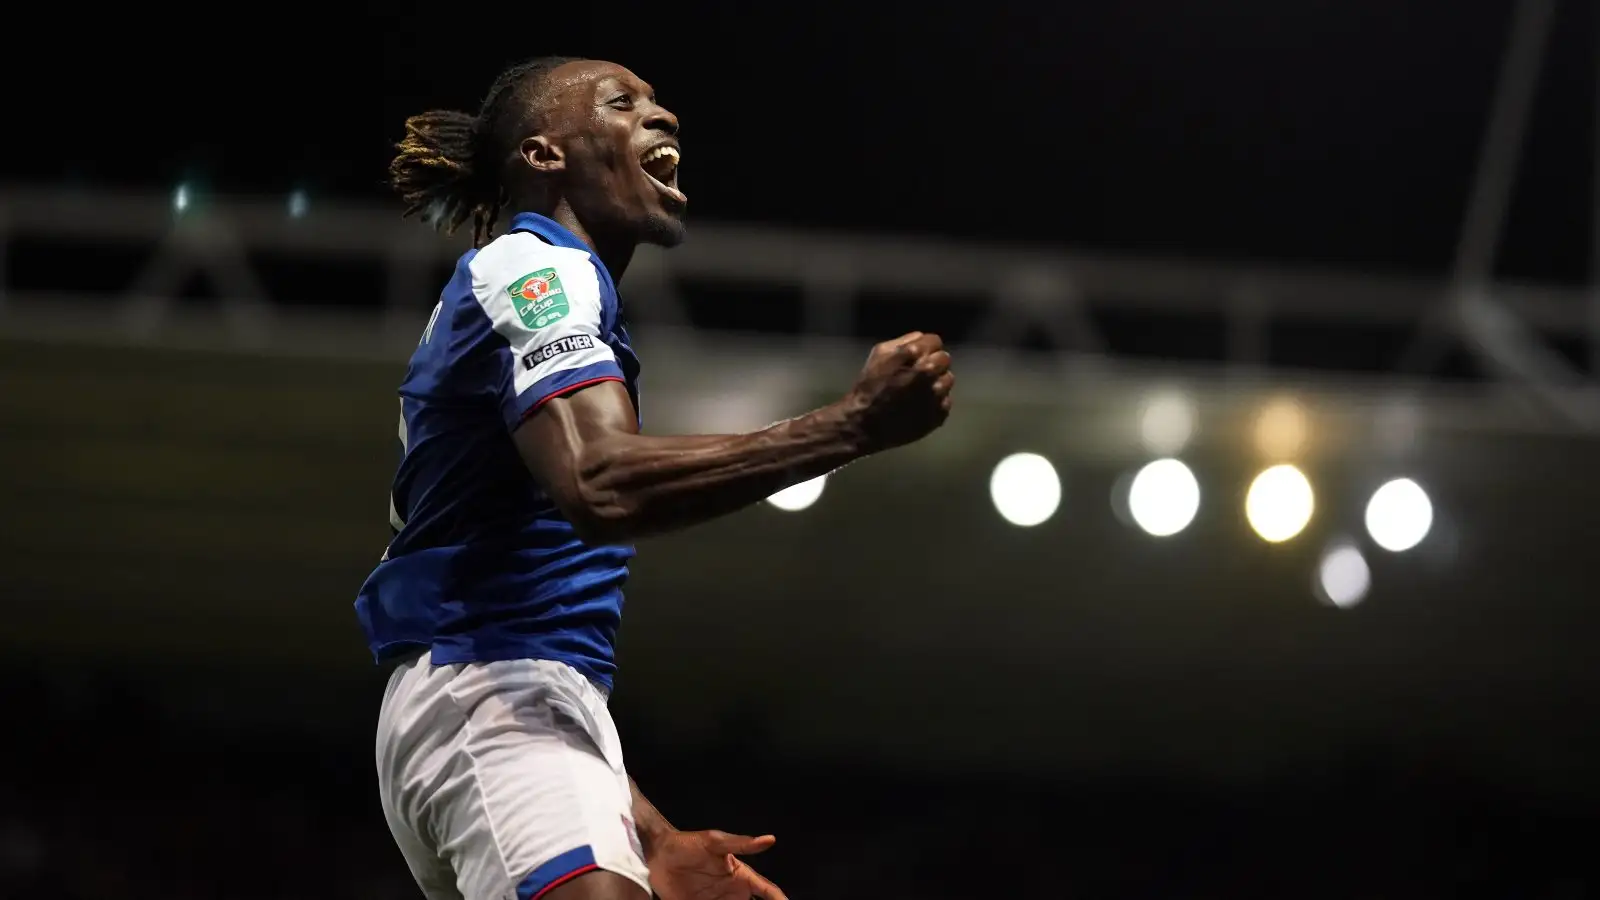 Freddie Ladapo celebrates his goal for Ipswich against Wolves.